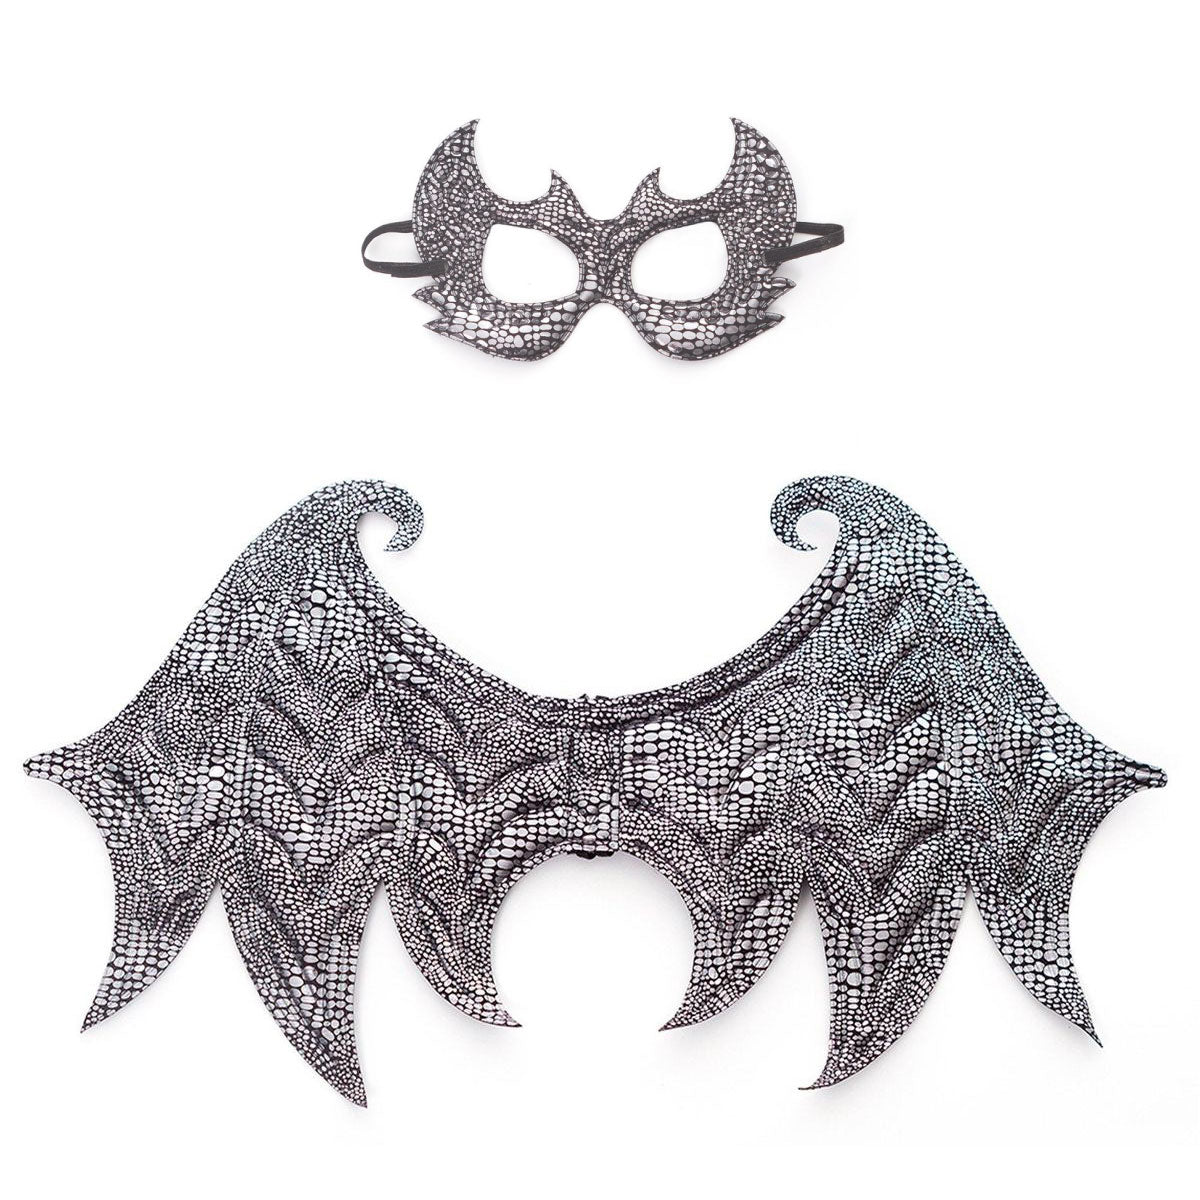 Dragon Wings and Mask Sets from Little Adventures